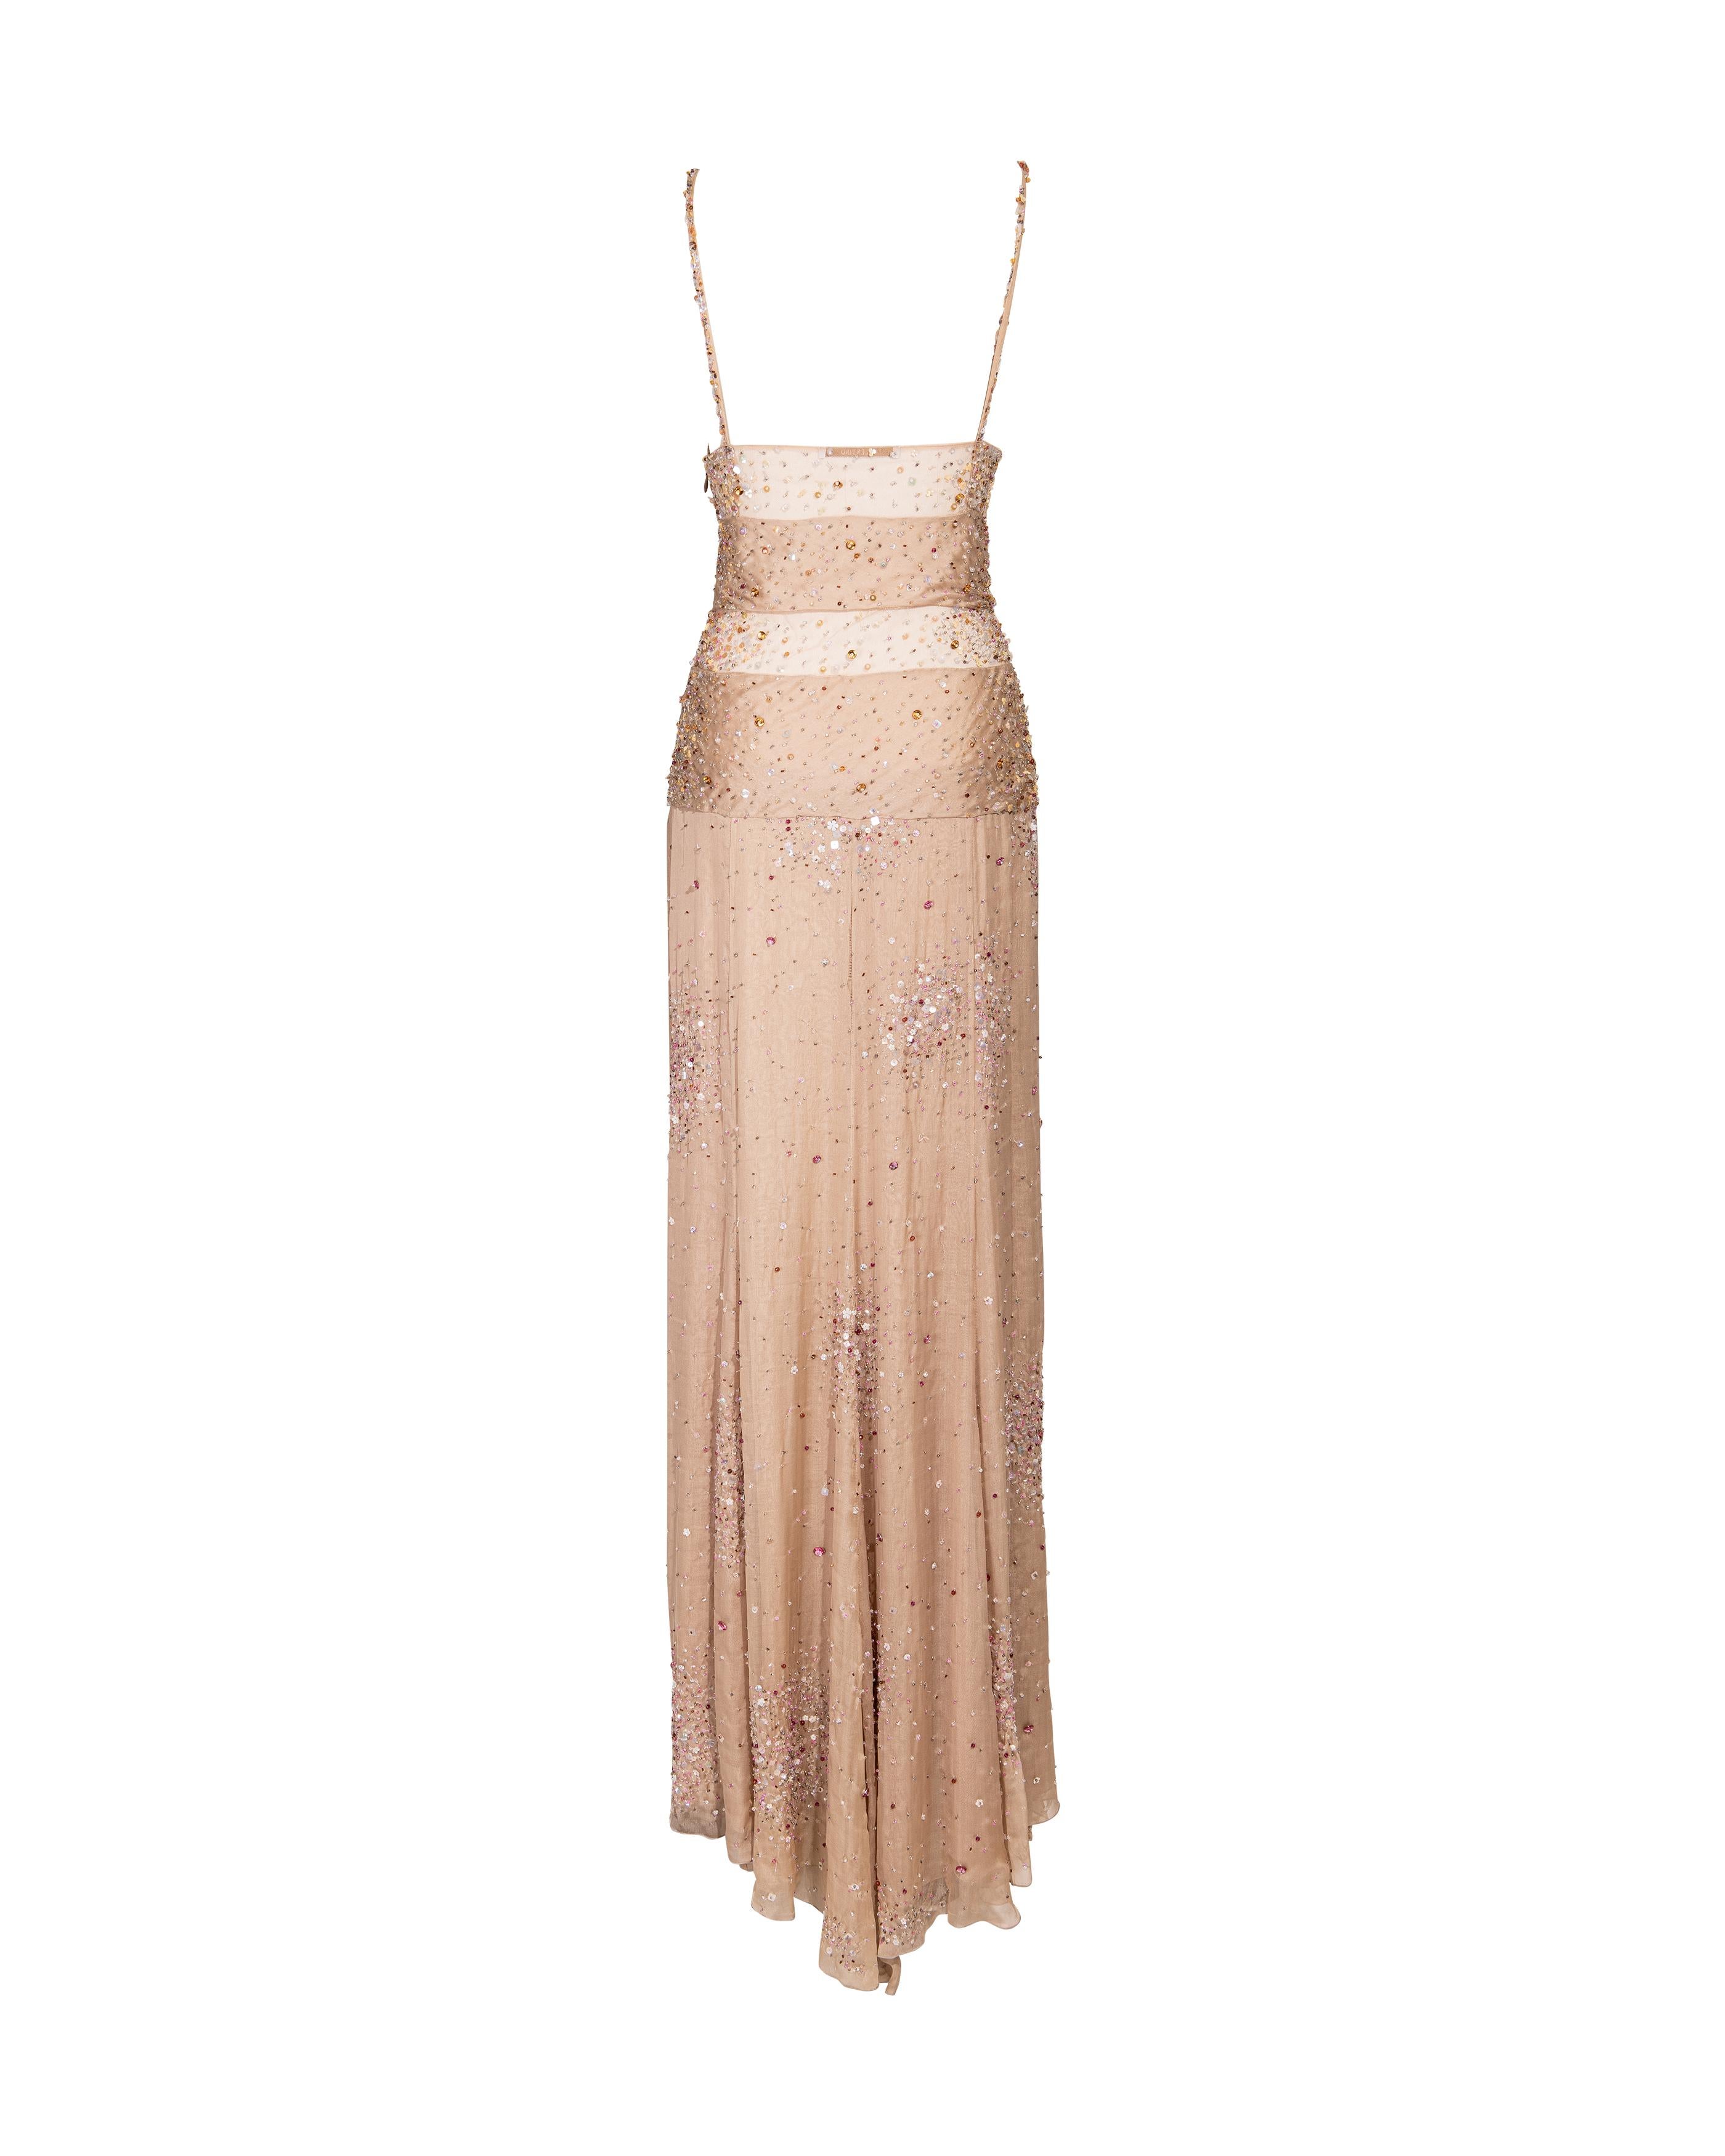 S/S 2001 Valentino Mesh and Silk Tan Embellished Gown 2